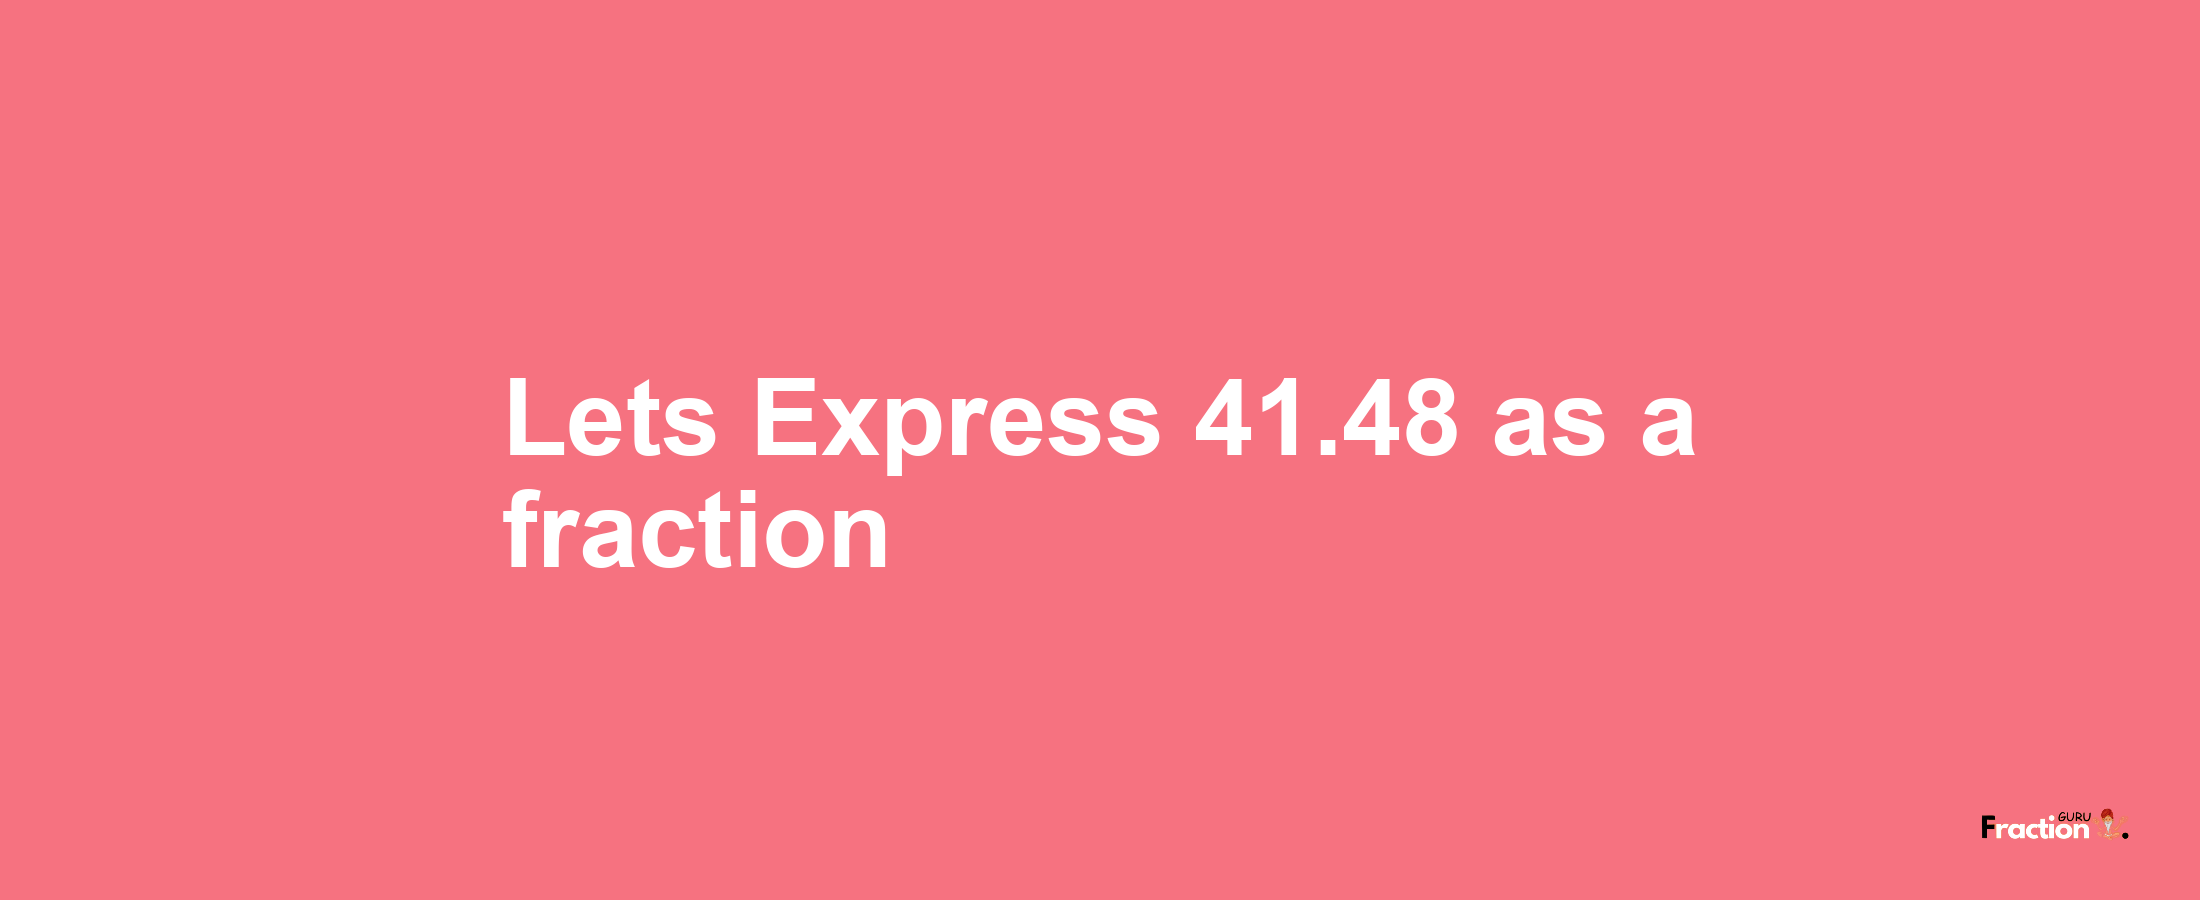 Lets Express 41.48 as afraction